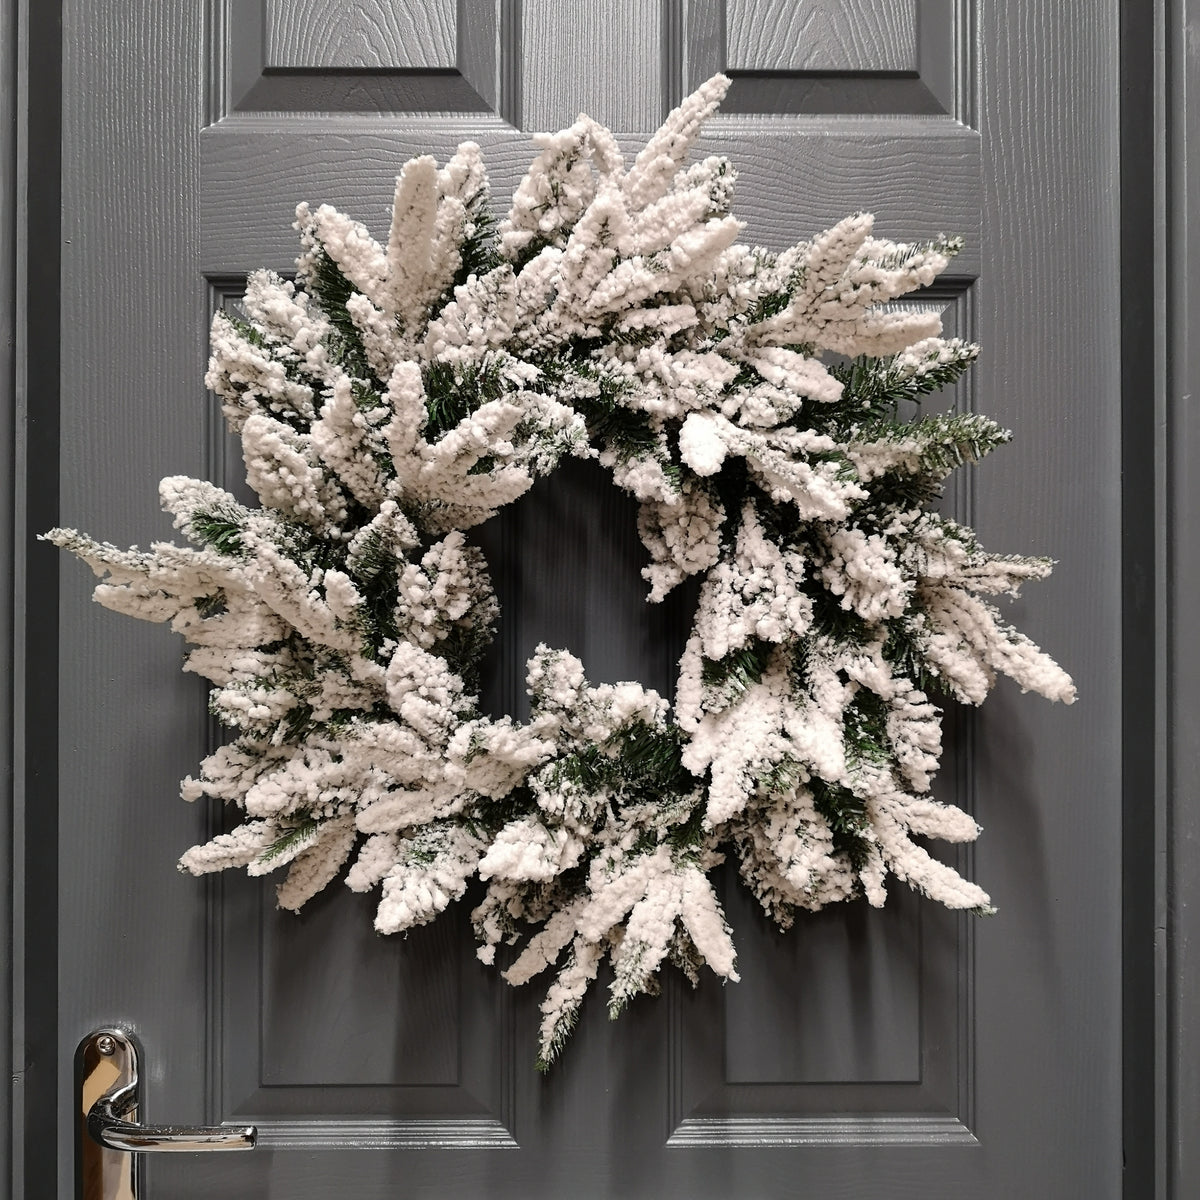 Premier 50cm Lapland Flocked Wreath with PE and PVC Tips